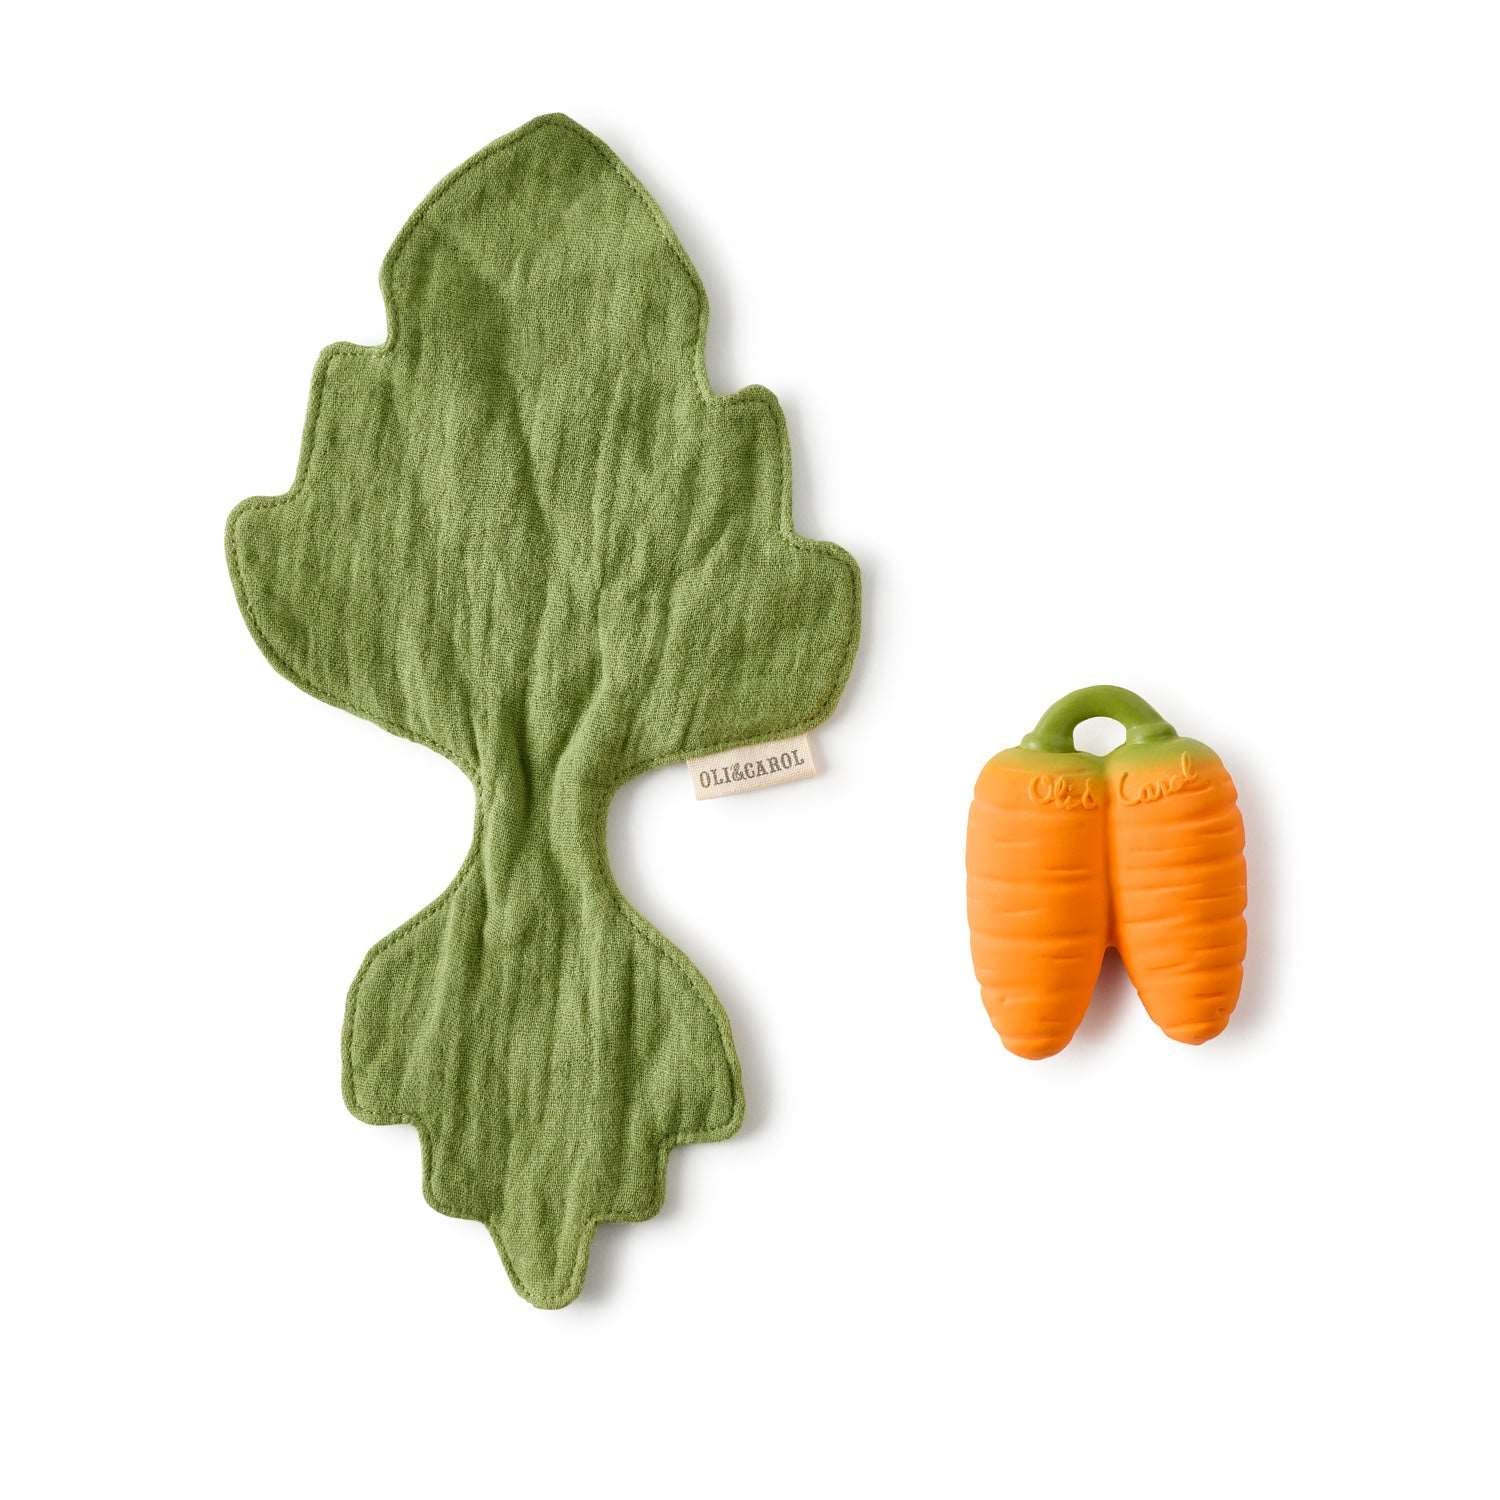 Toys Games and Puzzles Oli & Carol Cathy The Carrot Mini Teether by Weirs of Baggot Street